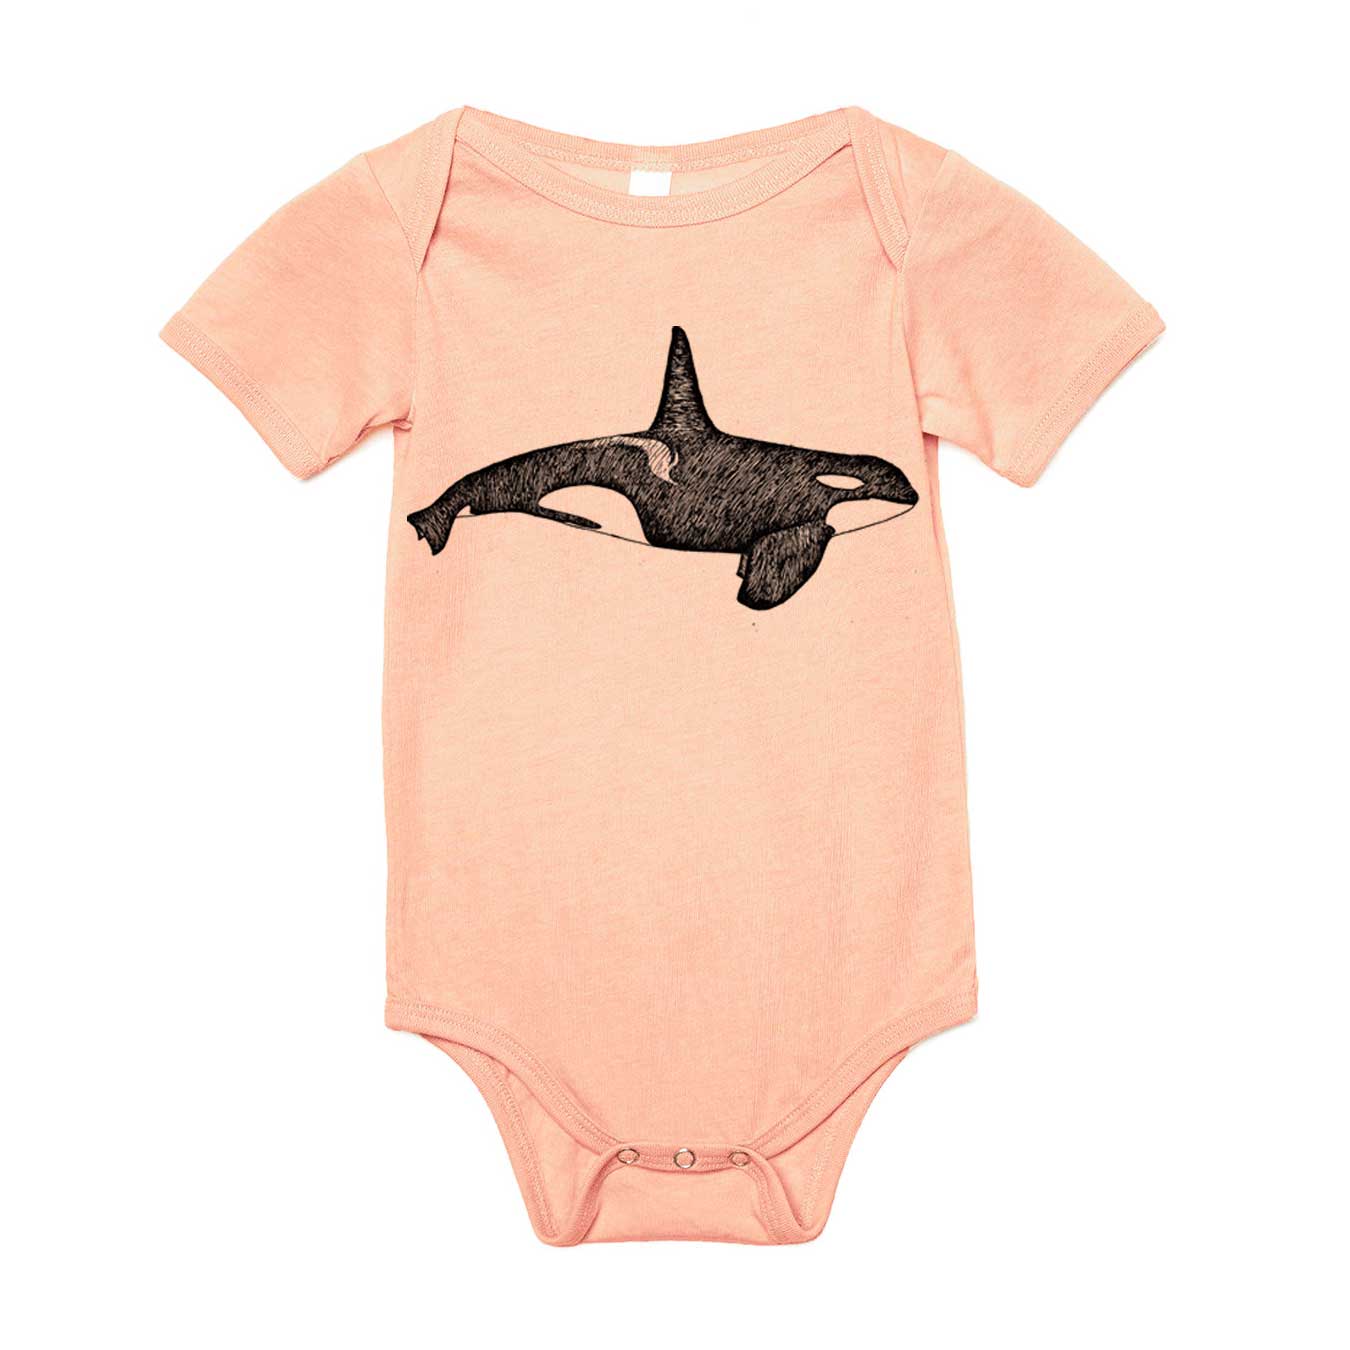 Orca Whale - Infant Triblend Onesie (Peach) Infant_Printed Bella + Canvas 